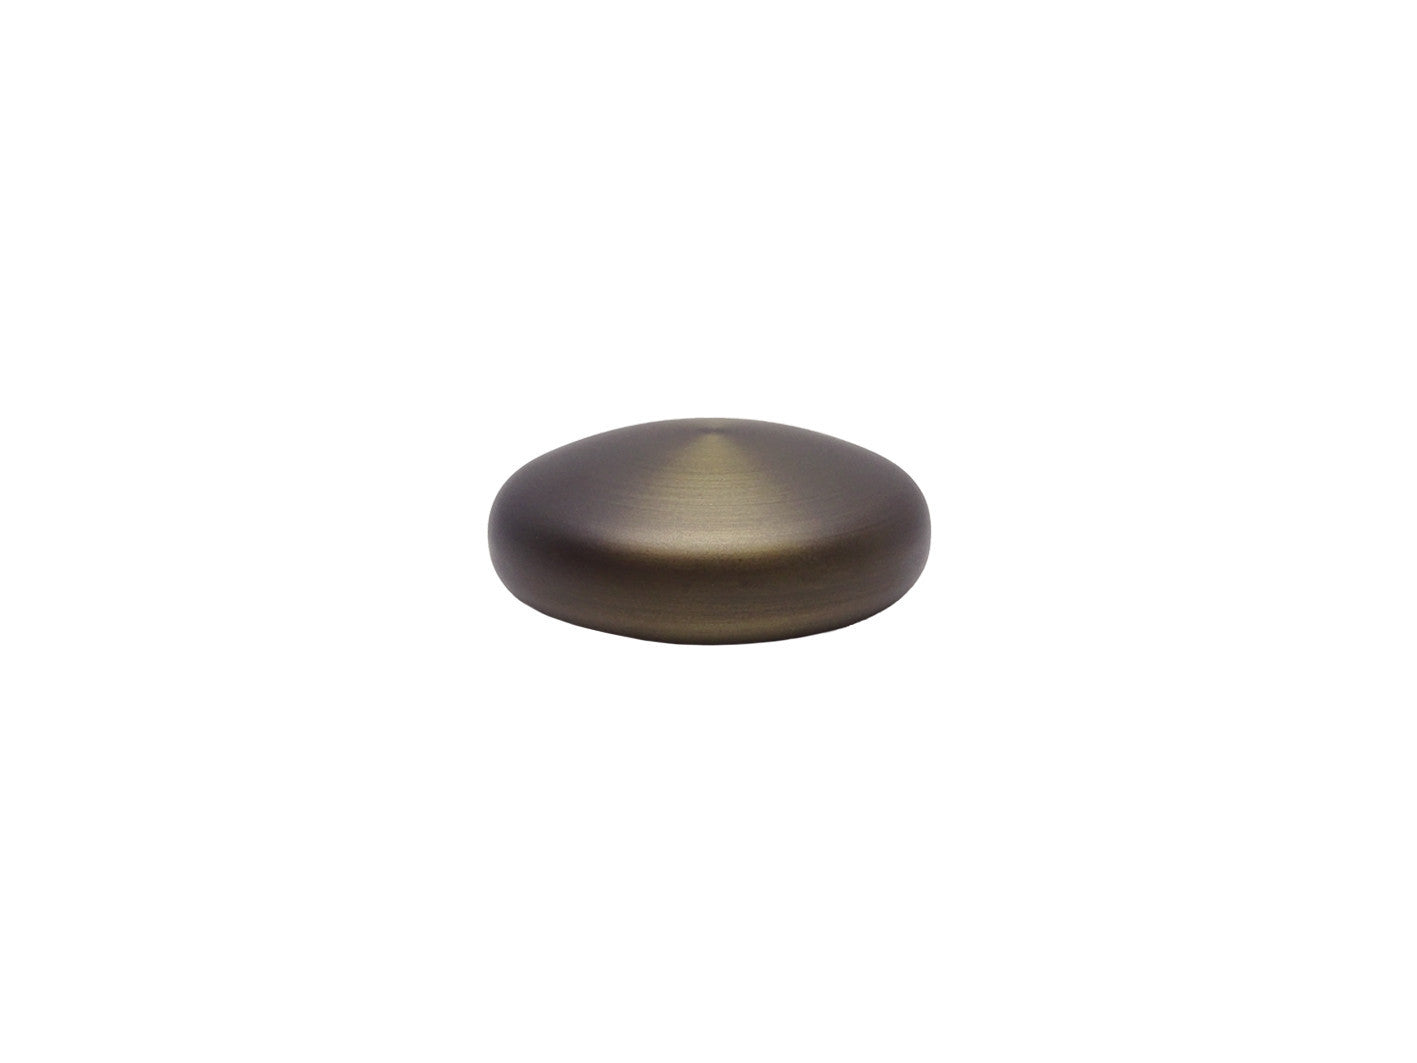 Elliptical finial in brushed steel for 30mm dia. Curtain Pole